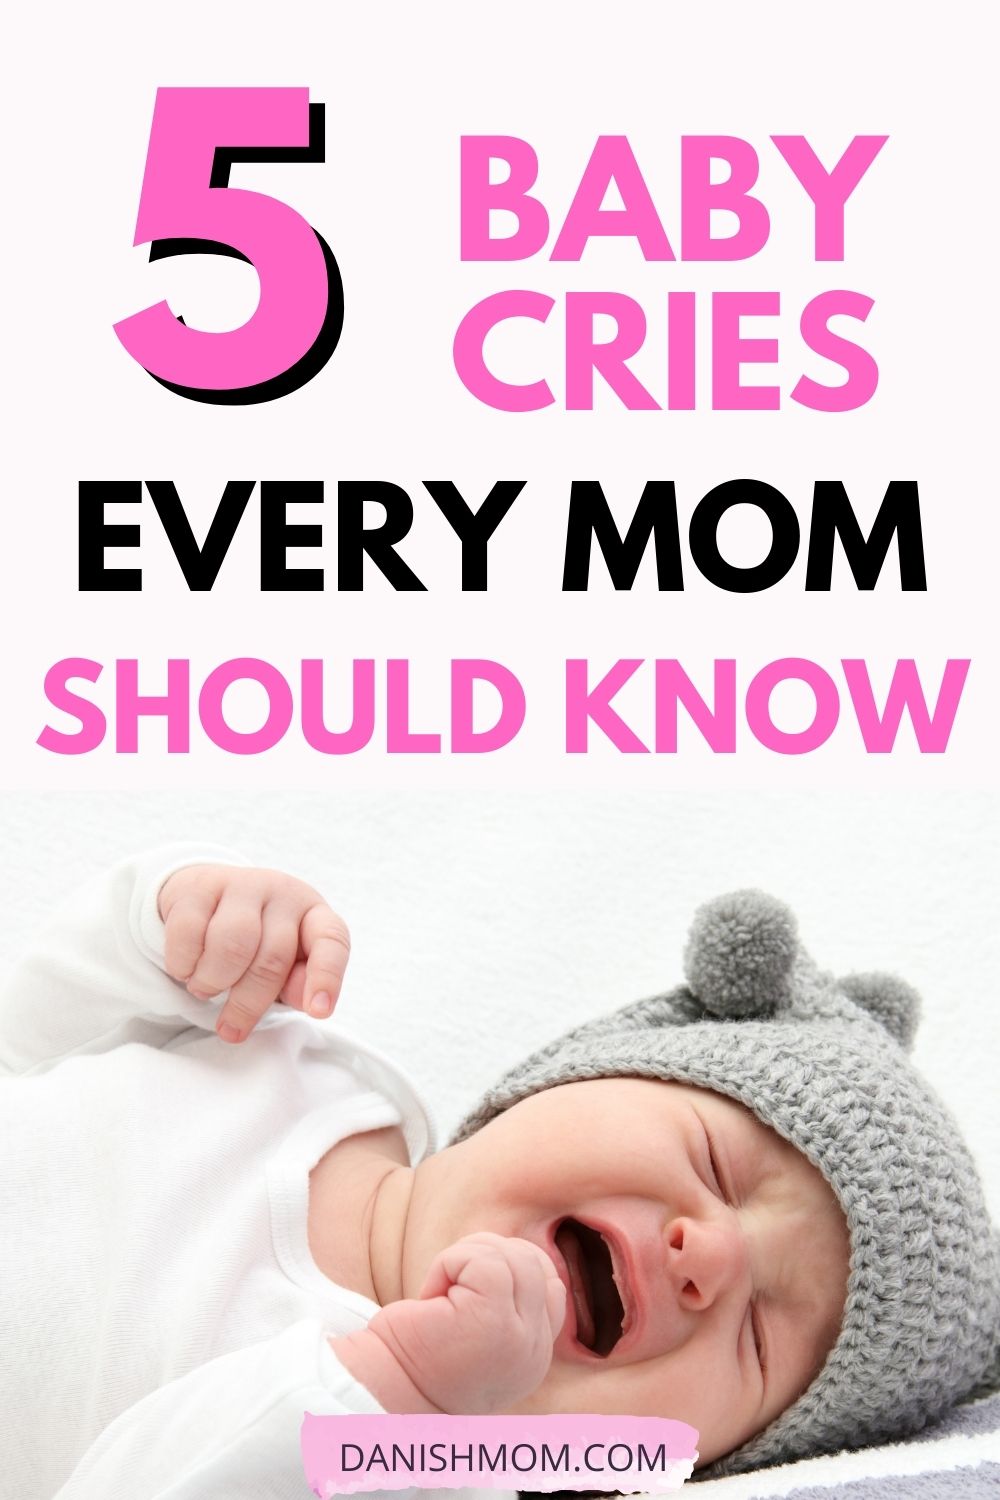 New Moms- Read this! Newborn keeps crying? These are key steps to understand and calm your baby. Learn how to calm your crying baby and keep mom sane. #babycrying #babycries #newbaby #sootheacryingbaby How to soothe a crying baby